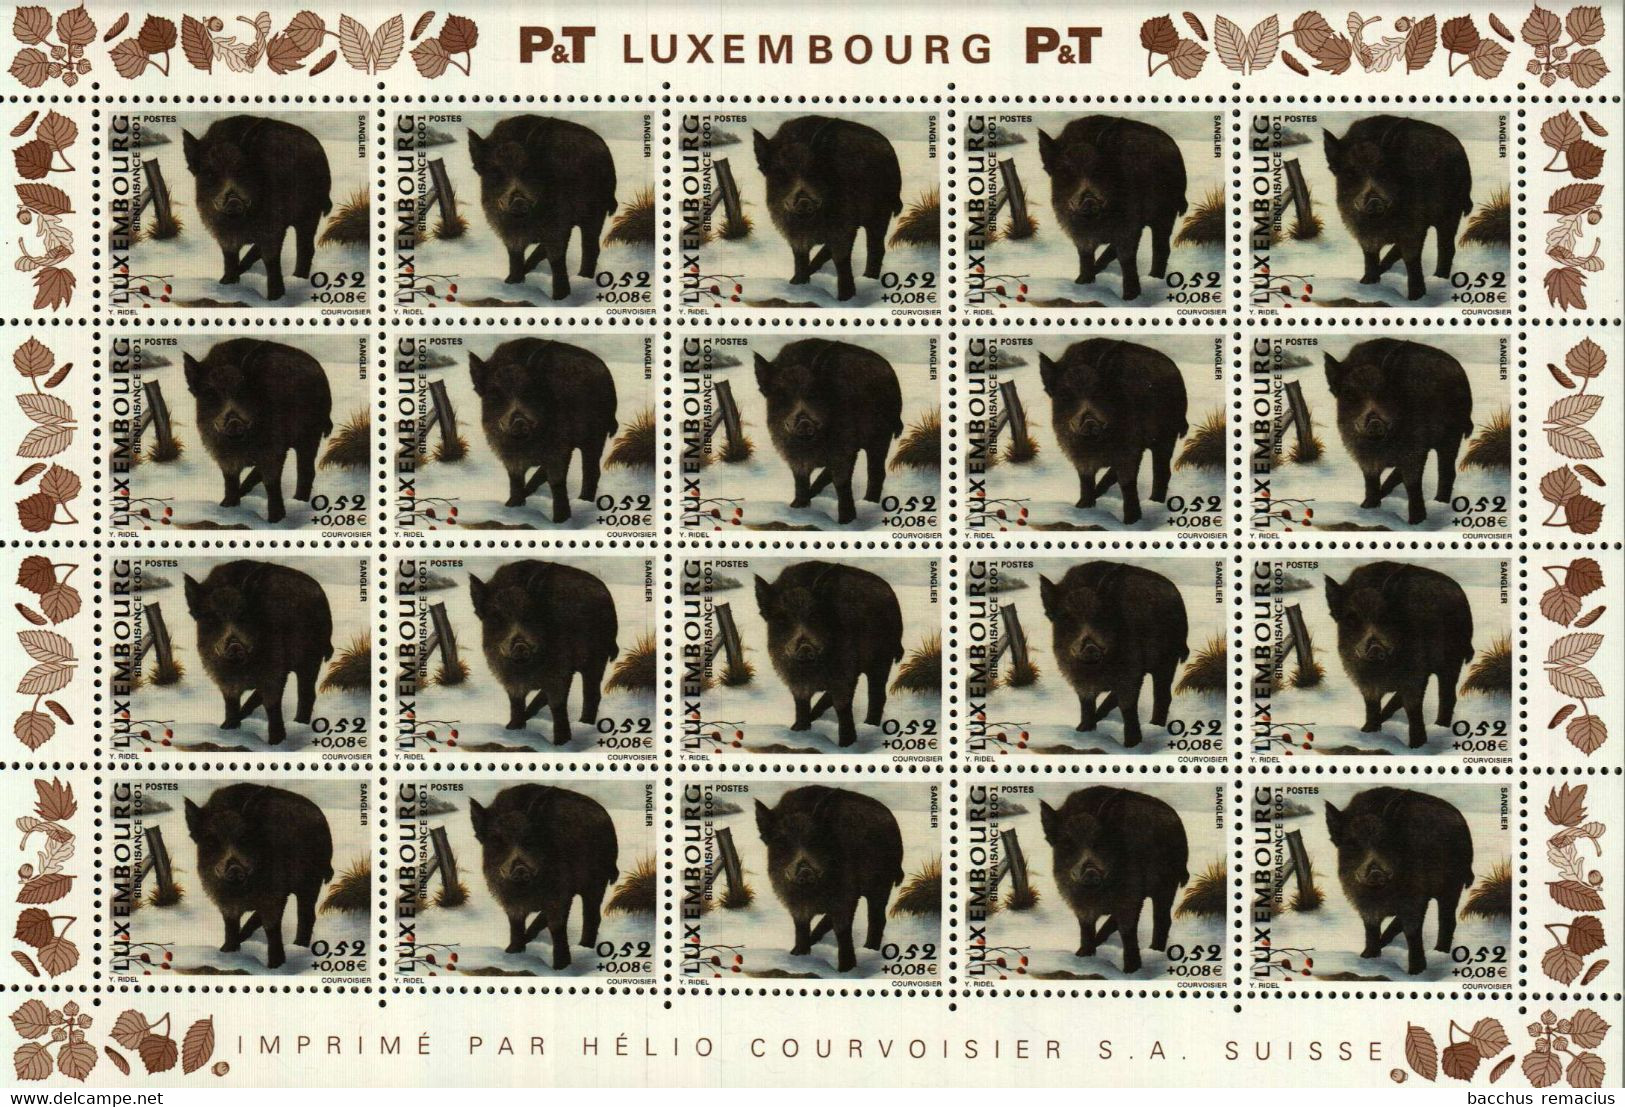 Luxembourg 4 Feuilles à 20 Timbres 0,45+0,05/0,52+0,08/0,89+0,21euro Ecureuil/Sanglier/Pigeon 2001 - Fogli Completi